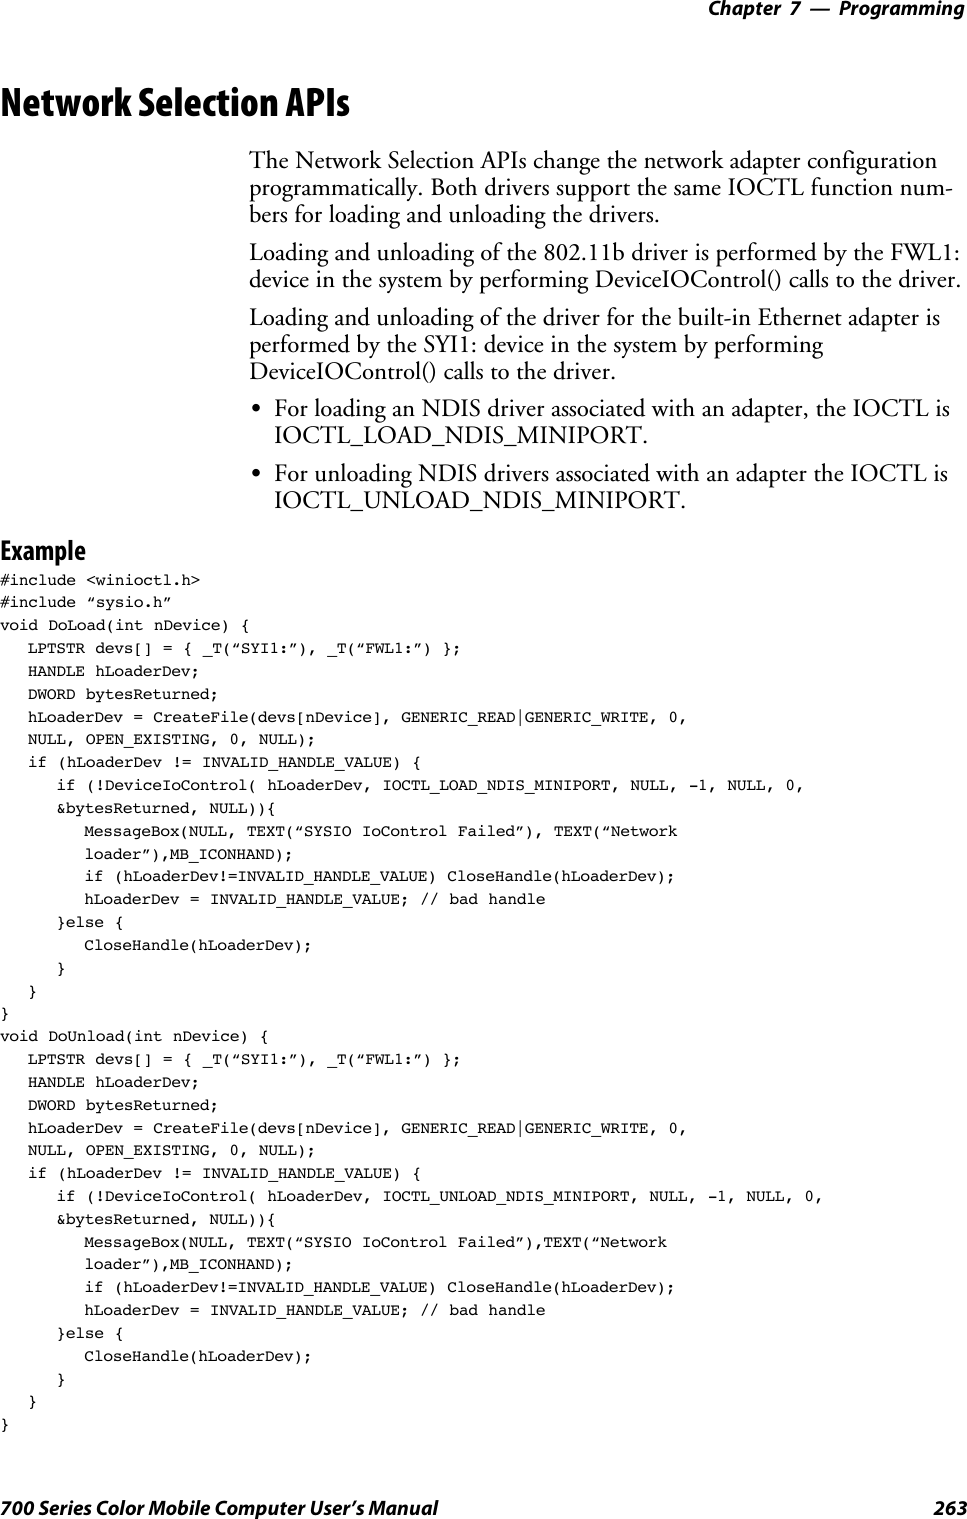 Programming—Chapter 7263700 Series Color Mobile Computer User’s ManualNetwork Selection APIsThe Network Selection APIs change the network adapter configurationprogrammatically. Both drivers support the same IOCTL function num-bers for loading and unloading the drivers.Loading and unloading of the 802.11b driver is performed by the FWL1:device in the system by performing DeviceIOControl() calls to the driver.Loading and unloading of the driver for the built-in Ethernet adapter isperformed by the SYI1: device in the system by performingDeviceIOControl() calls to the driver.SFor loading an NDIS driver associated with an adapter, the IOCTL isIOCTL_LOAD_NDIS_MINIPORT.SFor unloading NDIS drivers associated with an adapter the IOCTL isIOCTL_UNLOAD_NDIS_MINIPORT.Example#include &lt;winioctl.h&gt;#include “sysio.h”void DoLoad(int nDevice) {LPTSTR devs[] = { _T(“SYI1:”), _T(“FWL1:”) };HANDLE hLoaderDev;DWORD bytesReturned;hLoaderDev = CreateFile(devs[nDevice], GENERIC_READ|GENERIC_WRITE, 0,NULL, OPEN_EXISTING, 0, NULL);if (hLoaderDev != INVALID_HANDLE_VALUE) {if (!DeviceIoControl( hLoaderDev, IOCTL_LOAD_NDIS_MINIPORT, NULL, -1, NULL, 0,&amp;bytesReturned, NULL)){MessageBox(NULL, TEXT(“SYSIO IoControl Failed”), TEXT(“Networkloader”),MB_ICONHAND);if (hLoaderDev!=INVALID_HANDLE_VALUE) CloseHandle(hLoaderDev);hLoaderDev = INVALID_HANDLE_VALUE; // bad handle}else {CloseHandle(hLoaderDev);}}}void DoUnload(int nDevice) {LPTSTR devs[] = { _T(“SYI1:”), _T(“FWL1:”) };HANDLE hLoaderDev;DWORD bytesReturned;hLoaderDev = CreateFile(devs[nDevice], GENERIC_READ|GENERIC_WRITE, 0,NULL, OPEN_EXISTING, 0, NULL);if (hLoaderDev != INVALID_HANDLE_VALUE) {if (!DeviceIoControl( hLoaderDev, IOCTL_UNLOAD_NDIS_MINIPORT, NULL, -1, NULL, 0,&amp;bytesReturned, NULL)){MessageBox(NULL, TEXT(“SYSIO IoControl Failed”),TEXT(“Networkloader”),MB_ICONHAND);if (hLoaderDev!=INVALID_HANDLE_VALUE) CloseHandle(hLoaderDev);hLoaderDev = INVALID_HANDLE_VALUE; // bad handle}else {CloseHandle(hLoaderDev);}}}